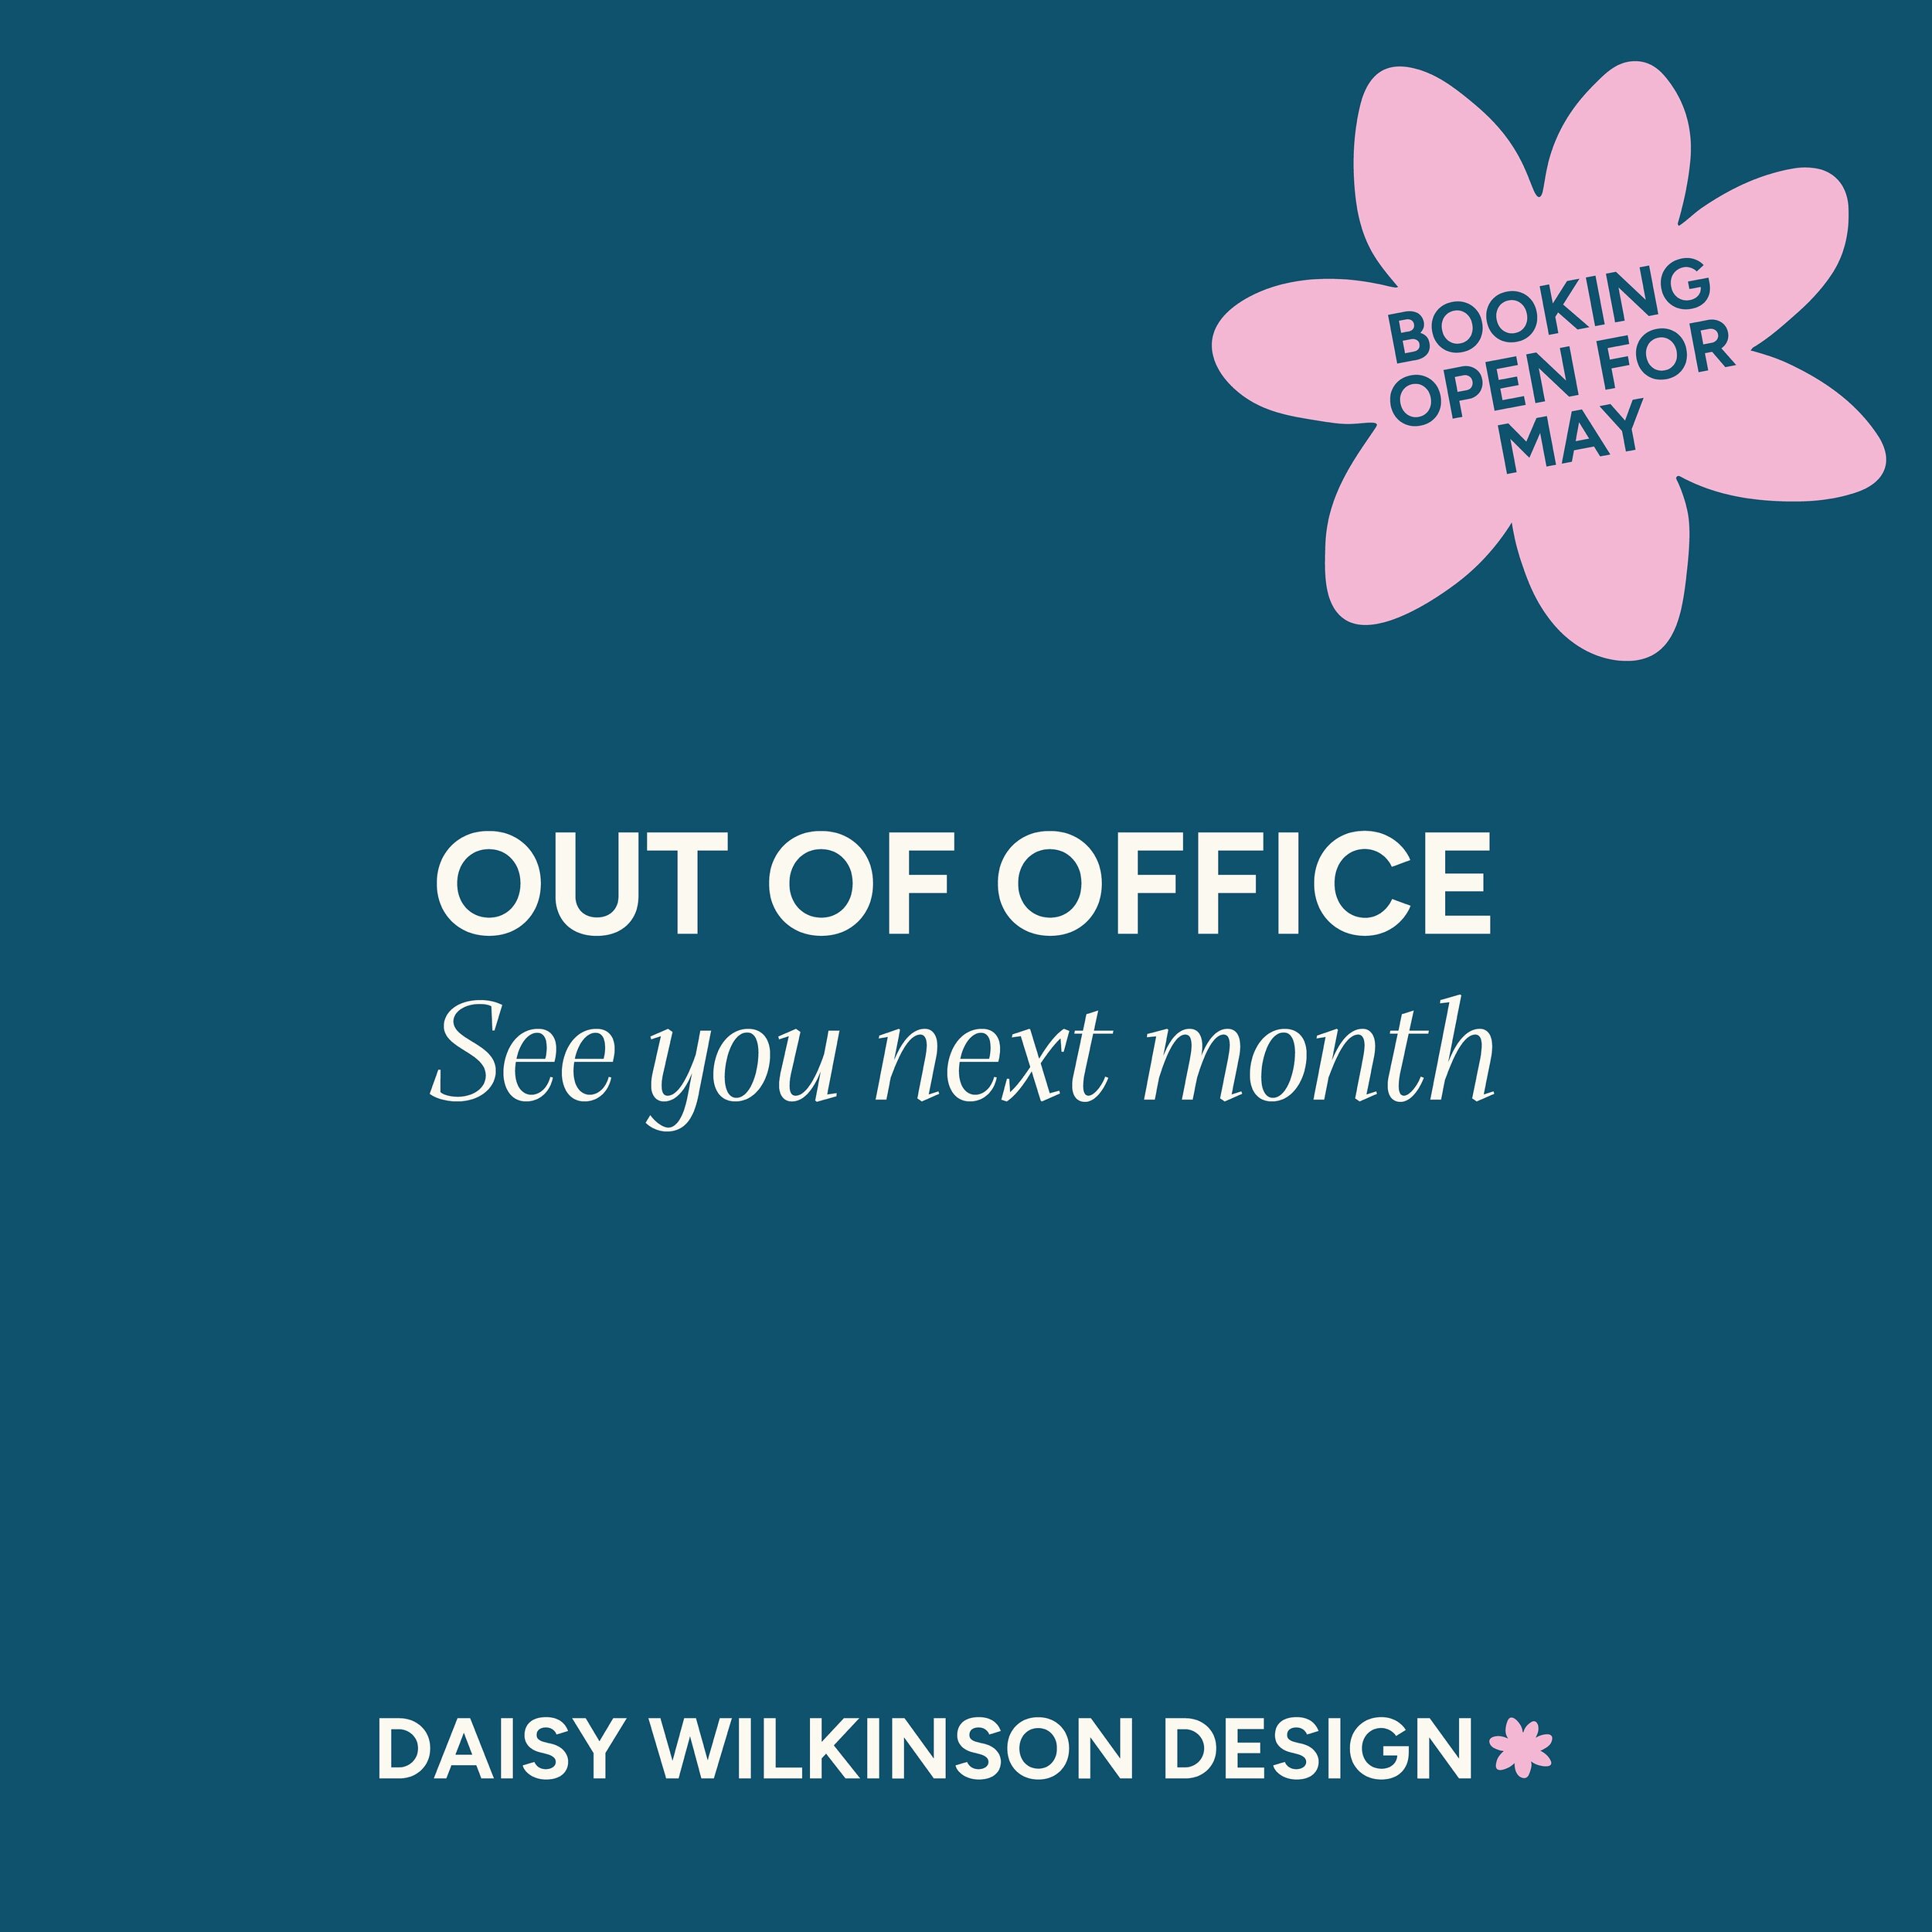 I am off to New Zealand and will be back late April🇳🇿

Booking open for May onwards www.daisywilkinson.com

#brand #branding #logo #logodesign #weddingstationery